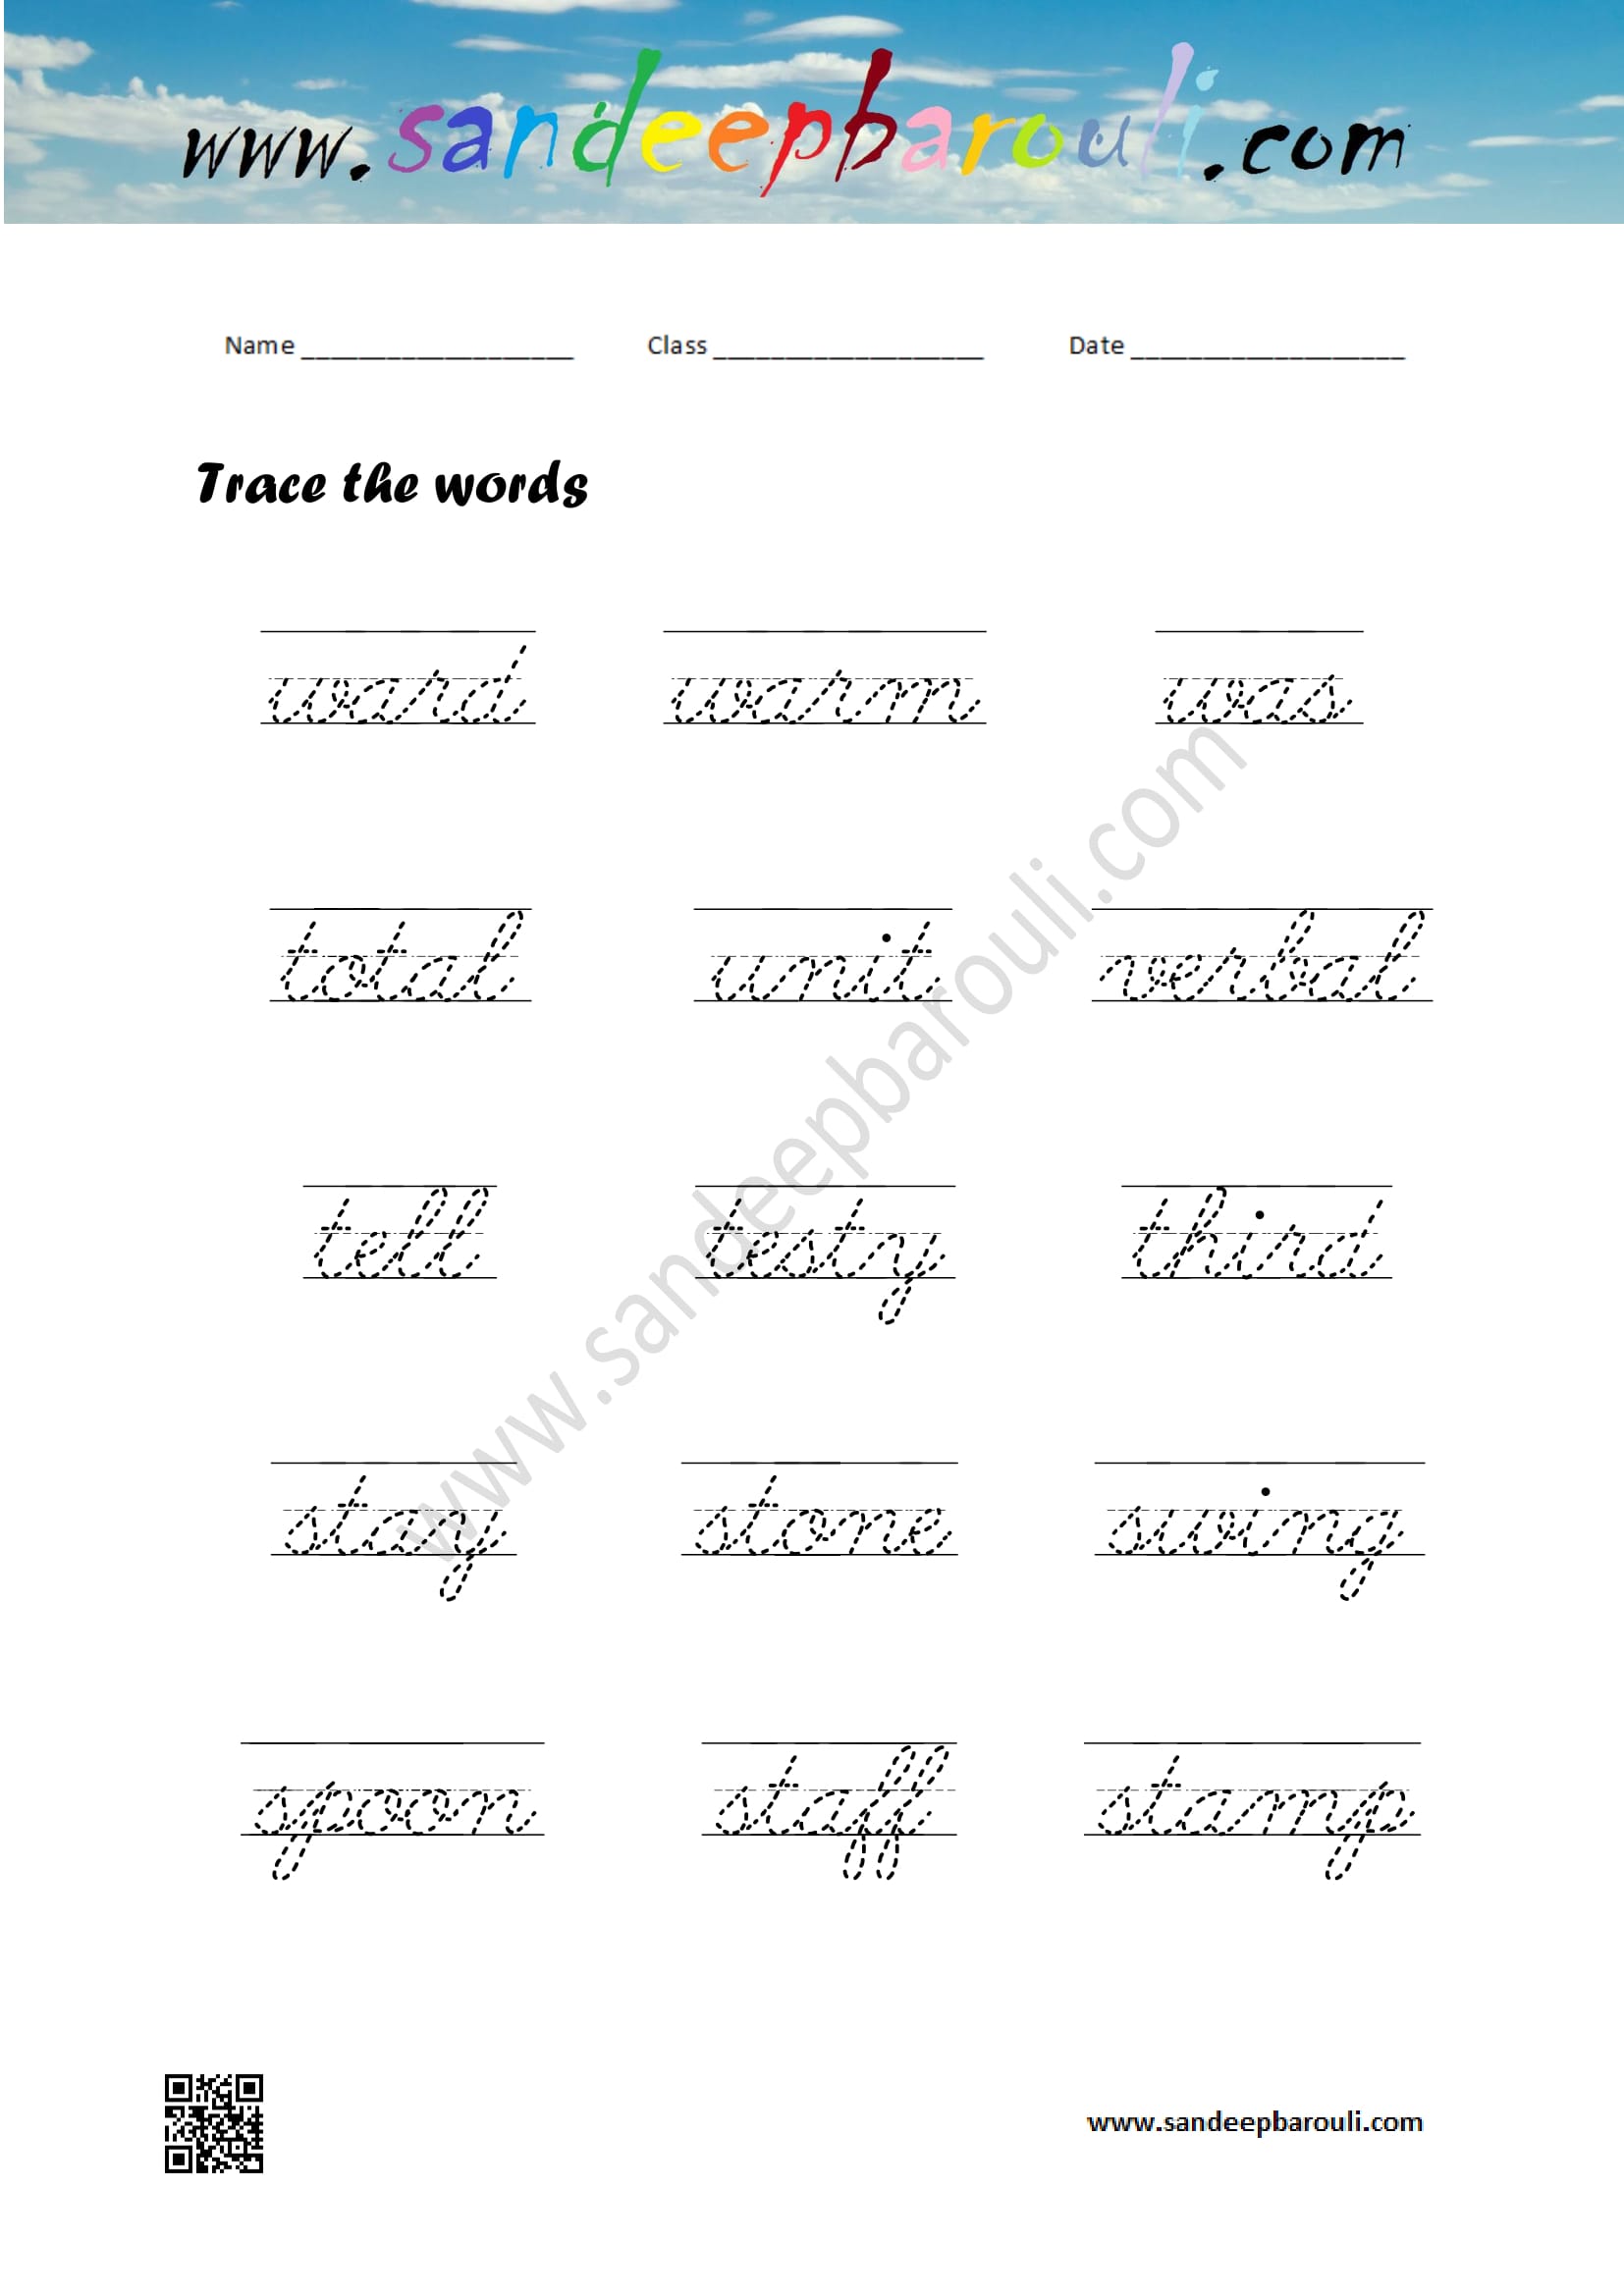 Cursive Writing Worksheet – Trace the words (30)